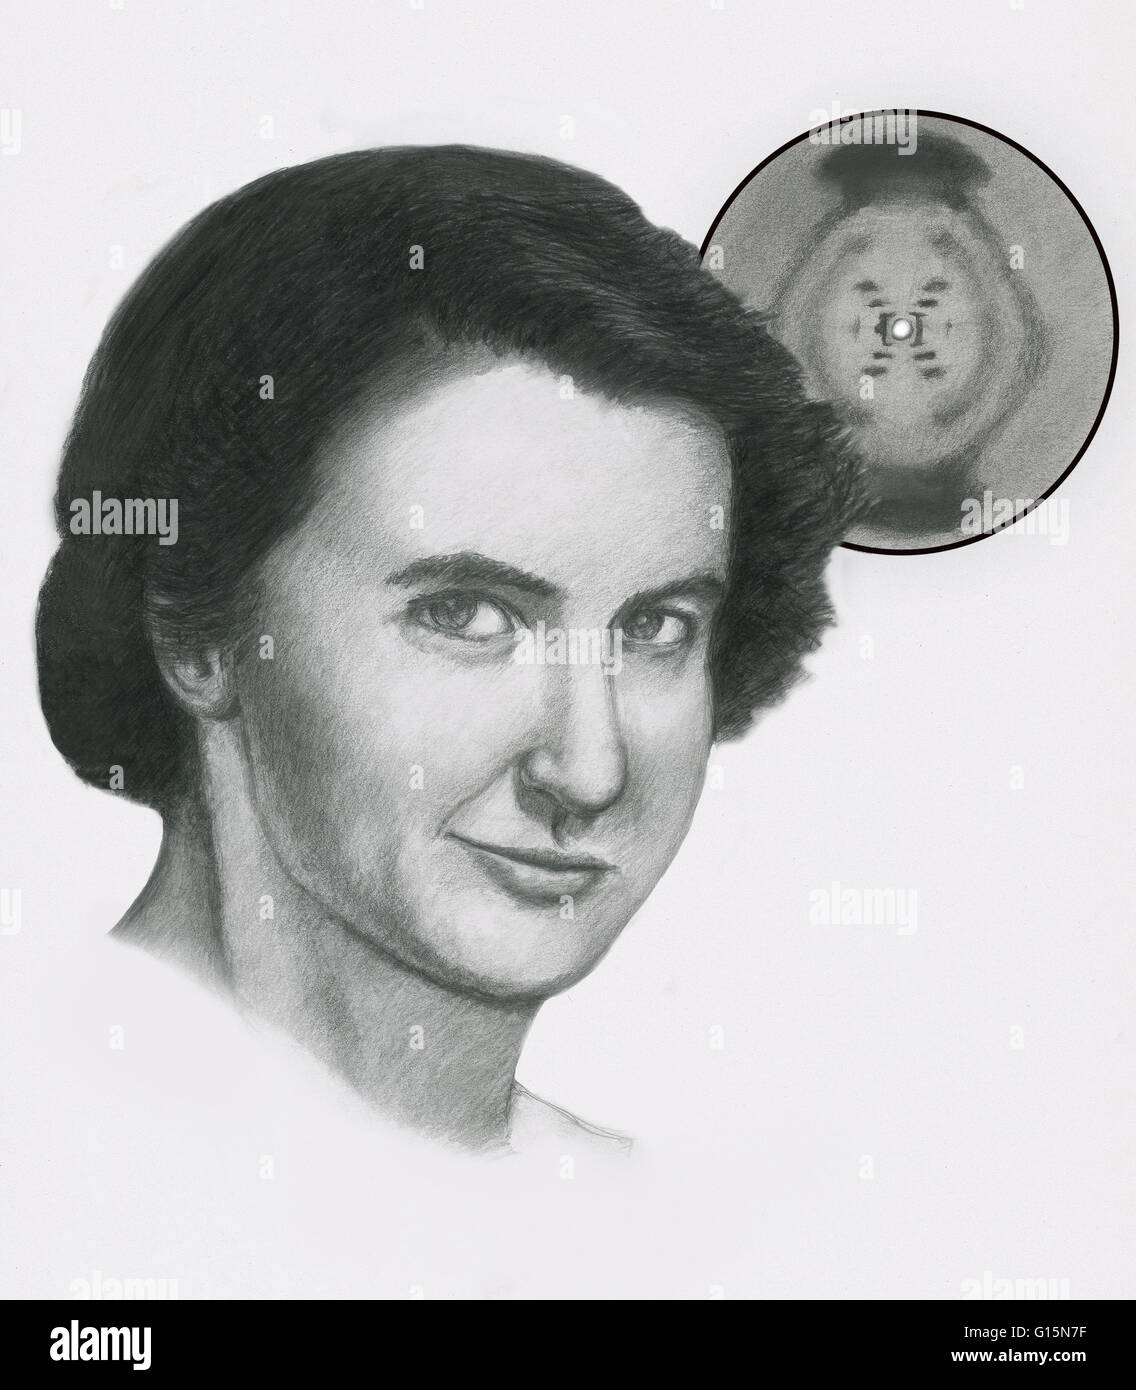 Illustration of Rosalind Franklin (1920-1958), British X-ray crystallographer. Her work producing x-ray images of DNA (Deoxyribonucleic acid), shown in the upper right, was crucial in the discovery of the structure of DNA by James Watson and Francis Crick Stock Photo